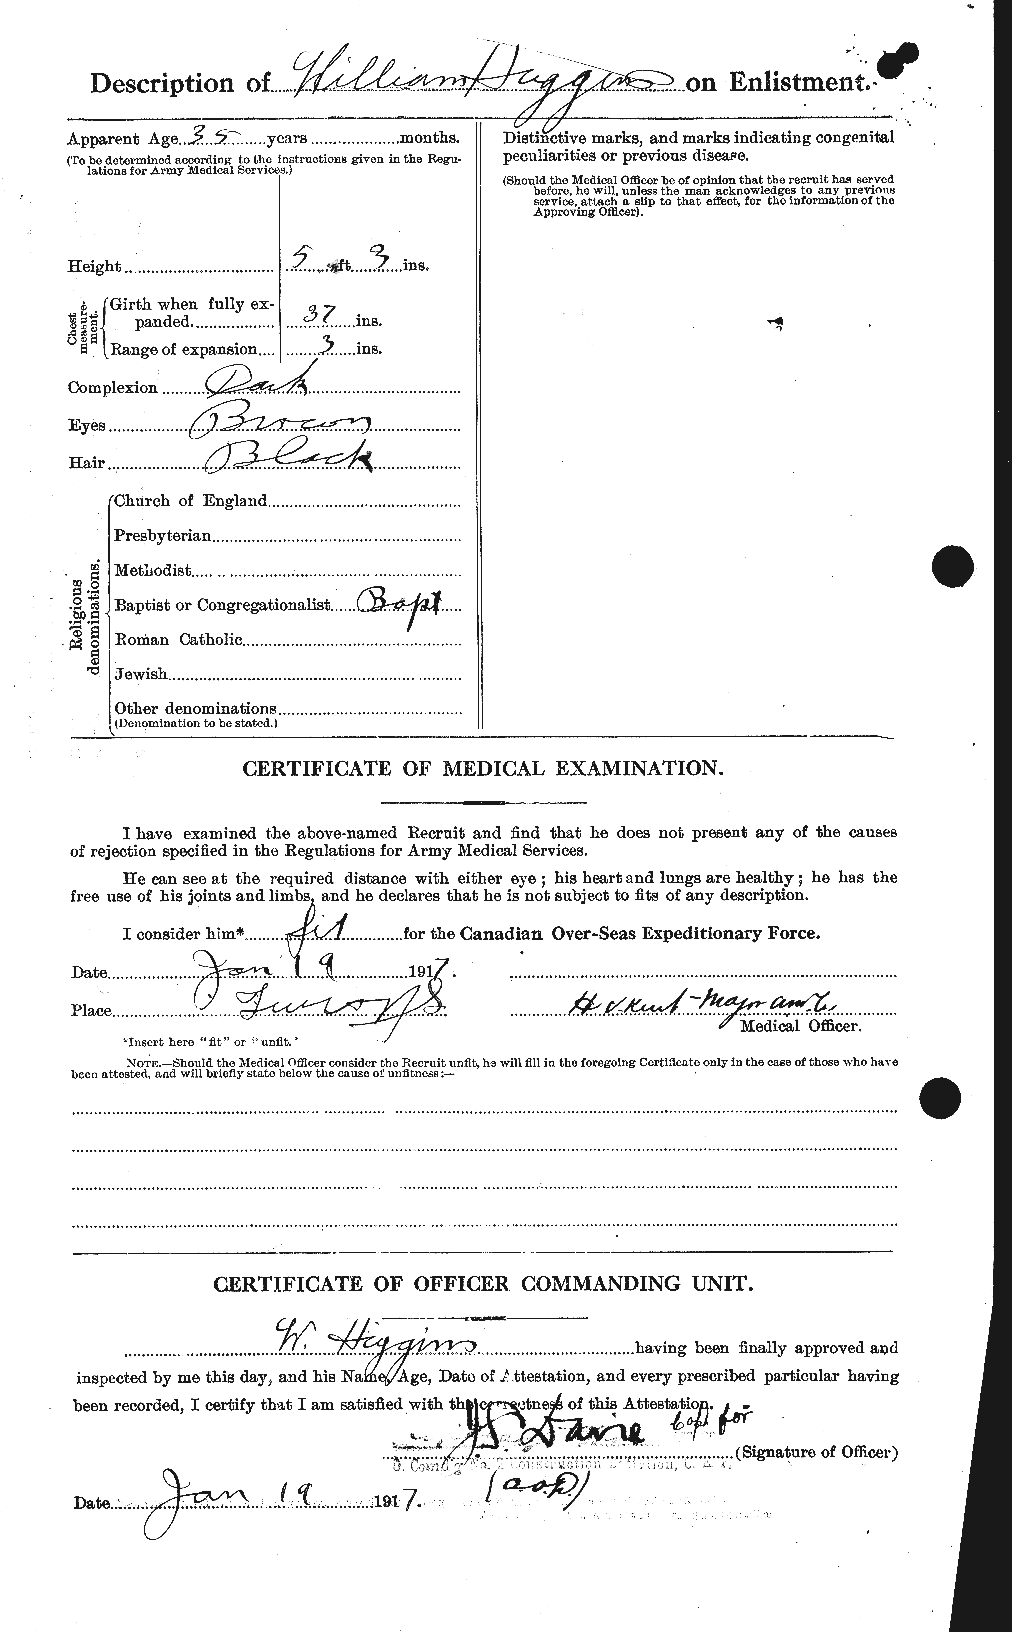 Personnel Records of the First World War - CEF 393751b